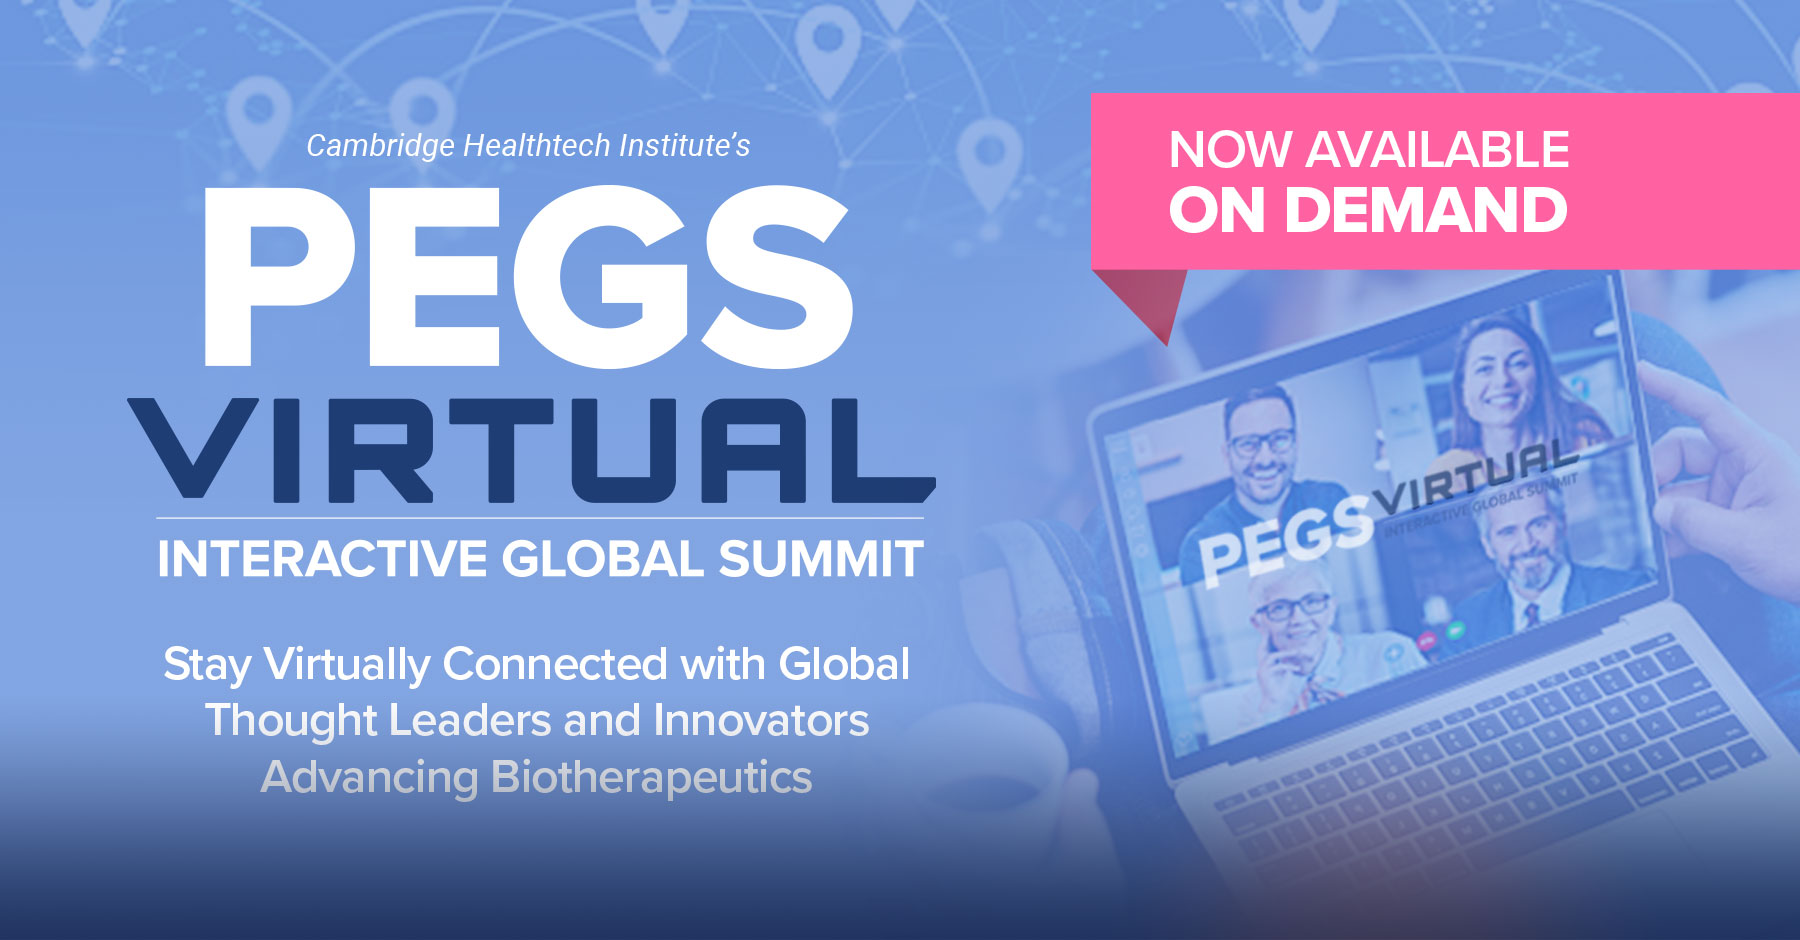 PEGS Virtual Interactive Global Summit Now Available OnDemand